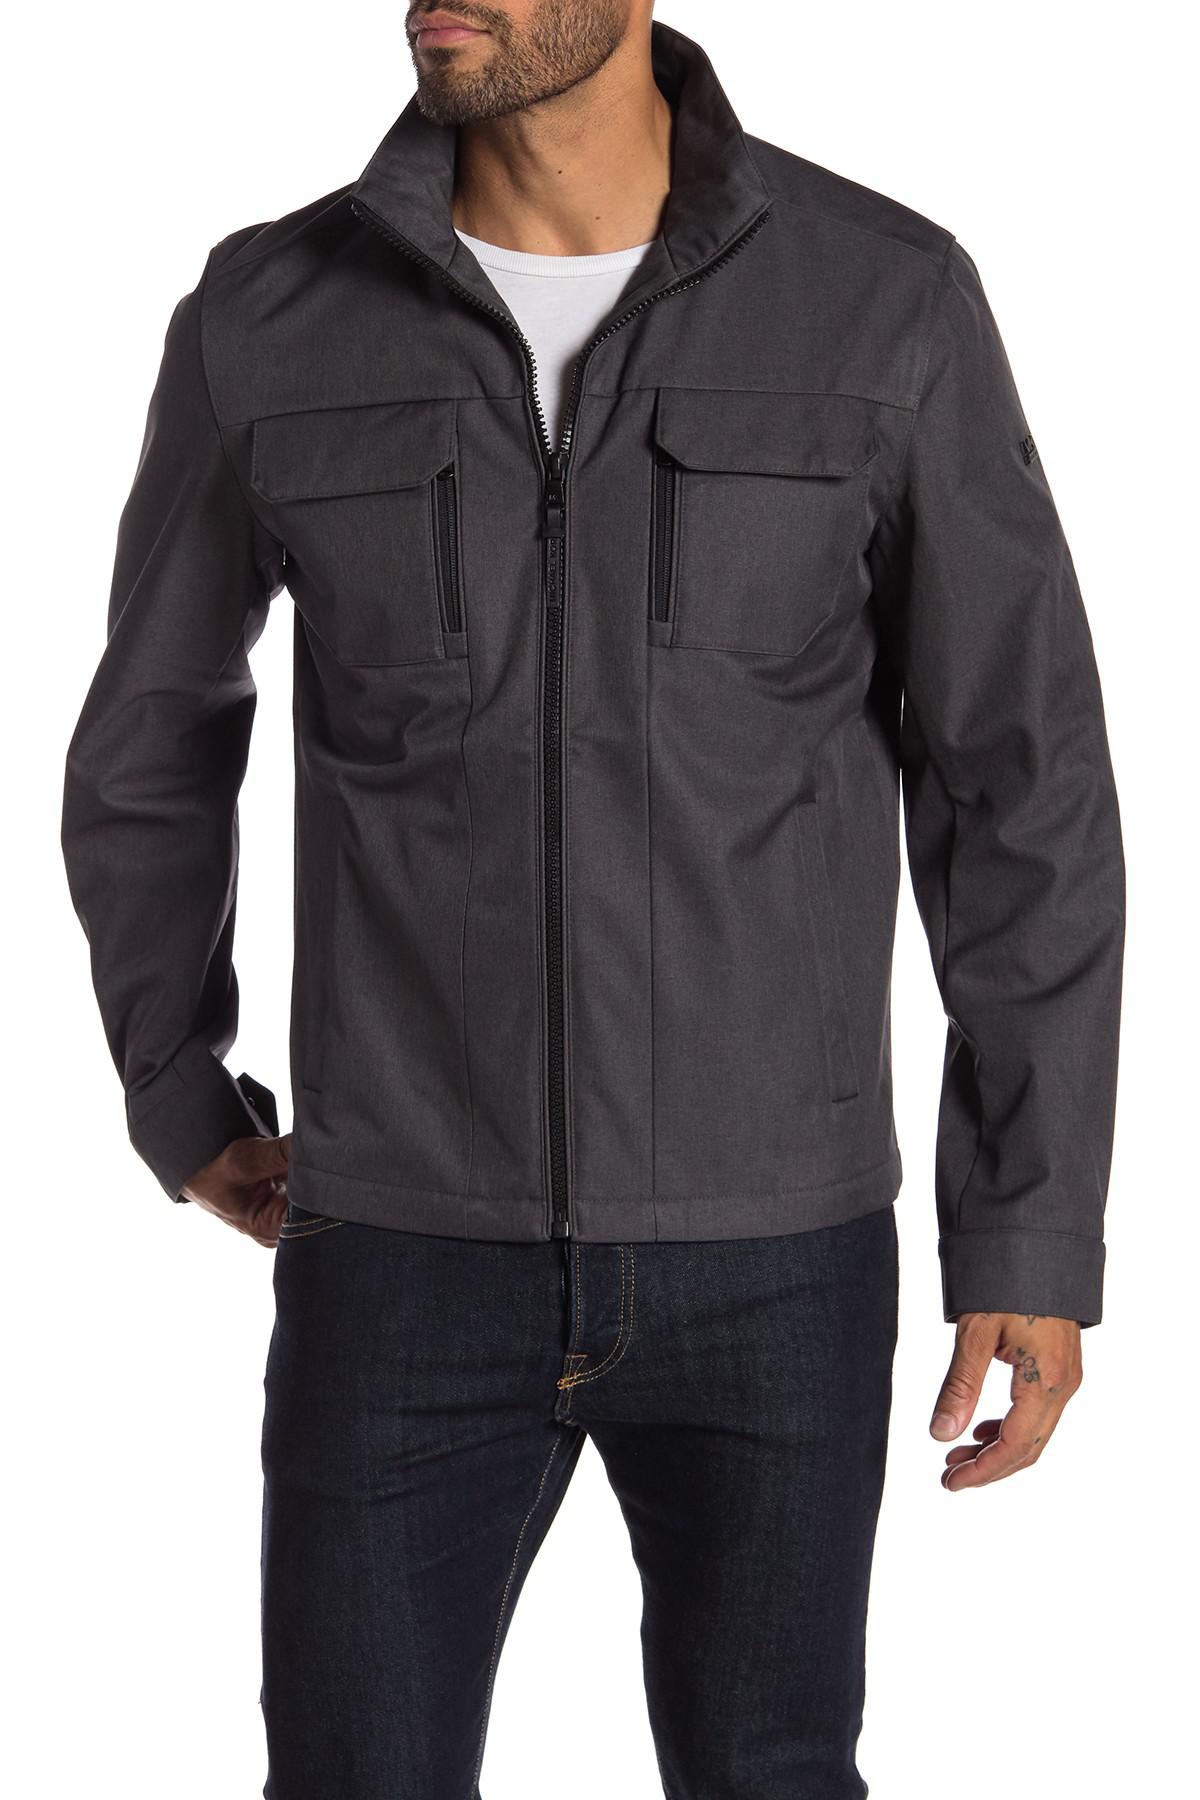 Michael Kors Synthetic Guilford Jacket 